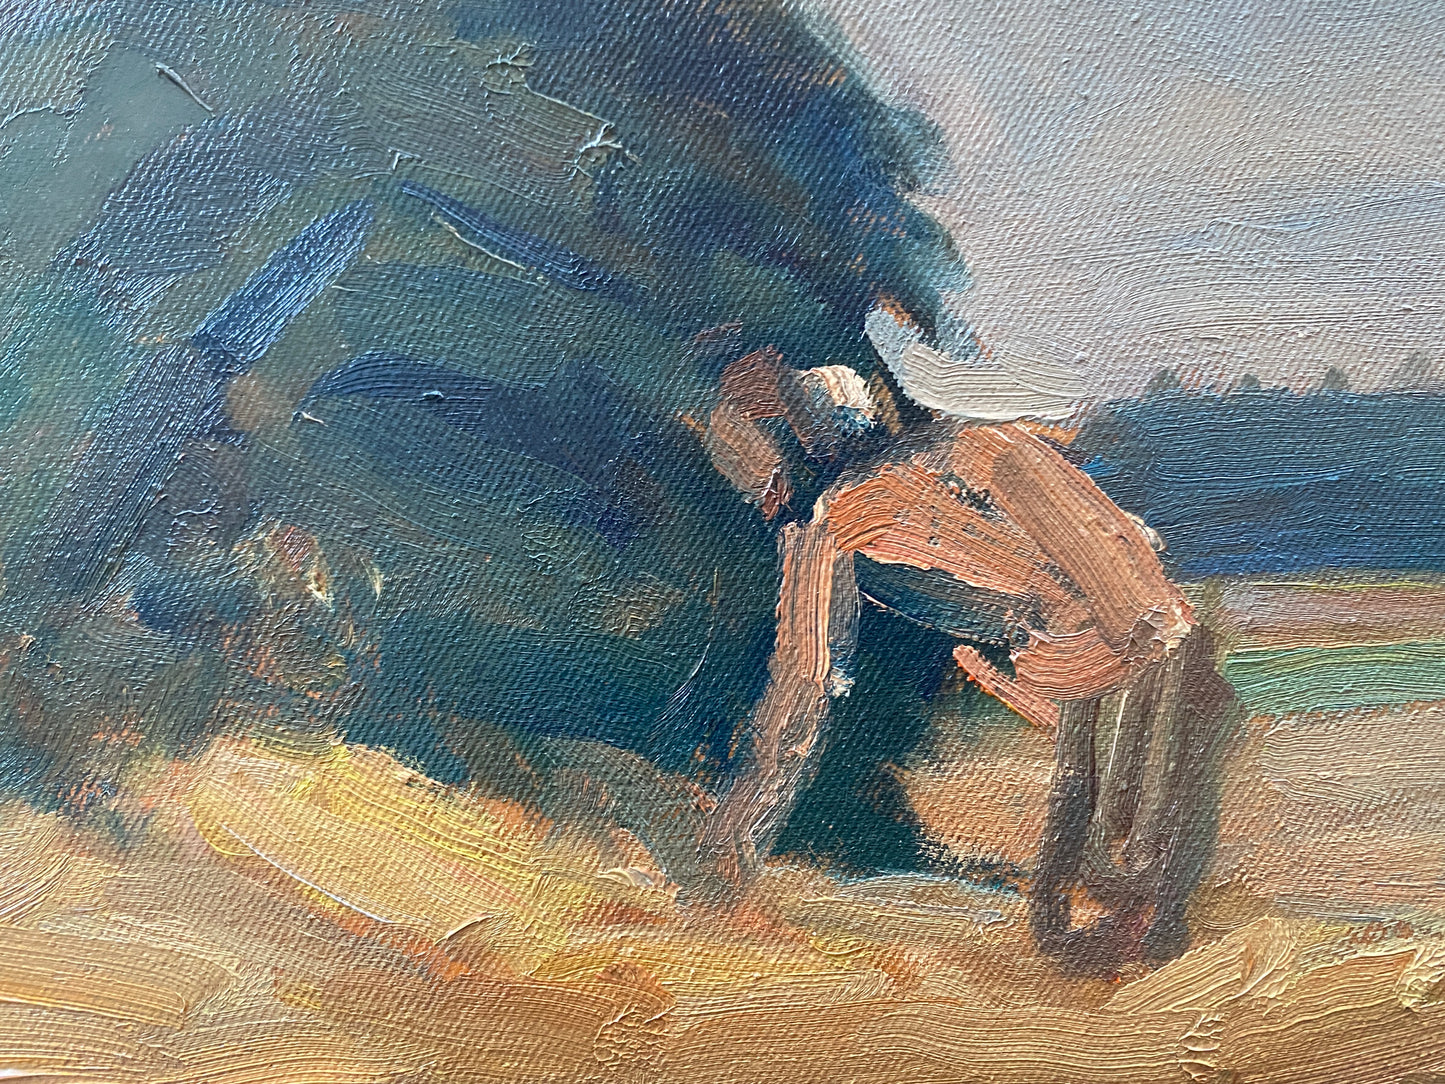 Oil on Canvas 'Horses Work the Field' Mid 20th Century - Impressionist Scene Oil on Canvas